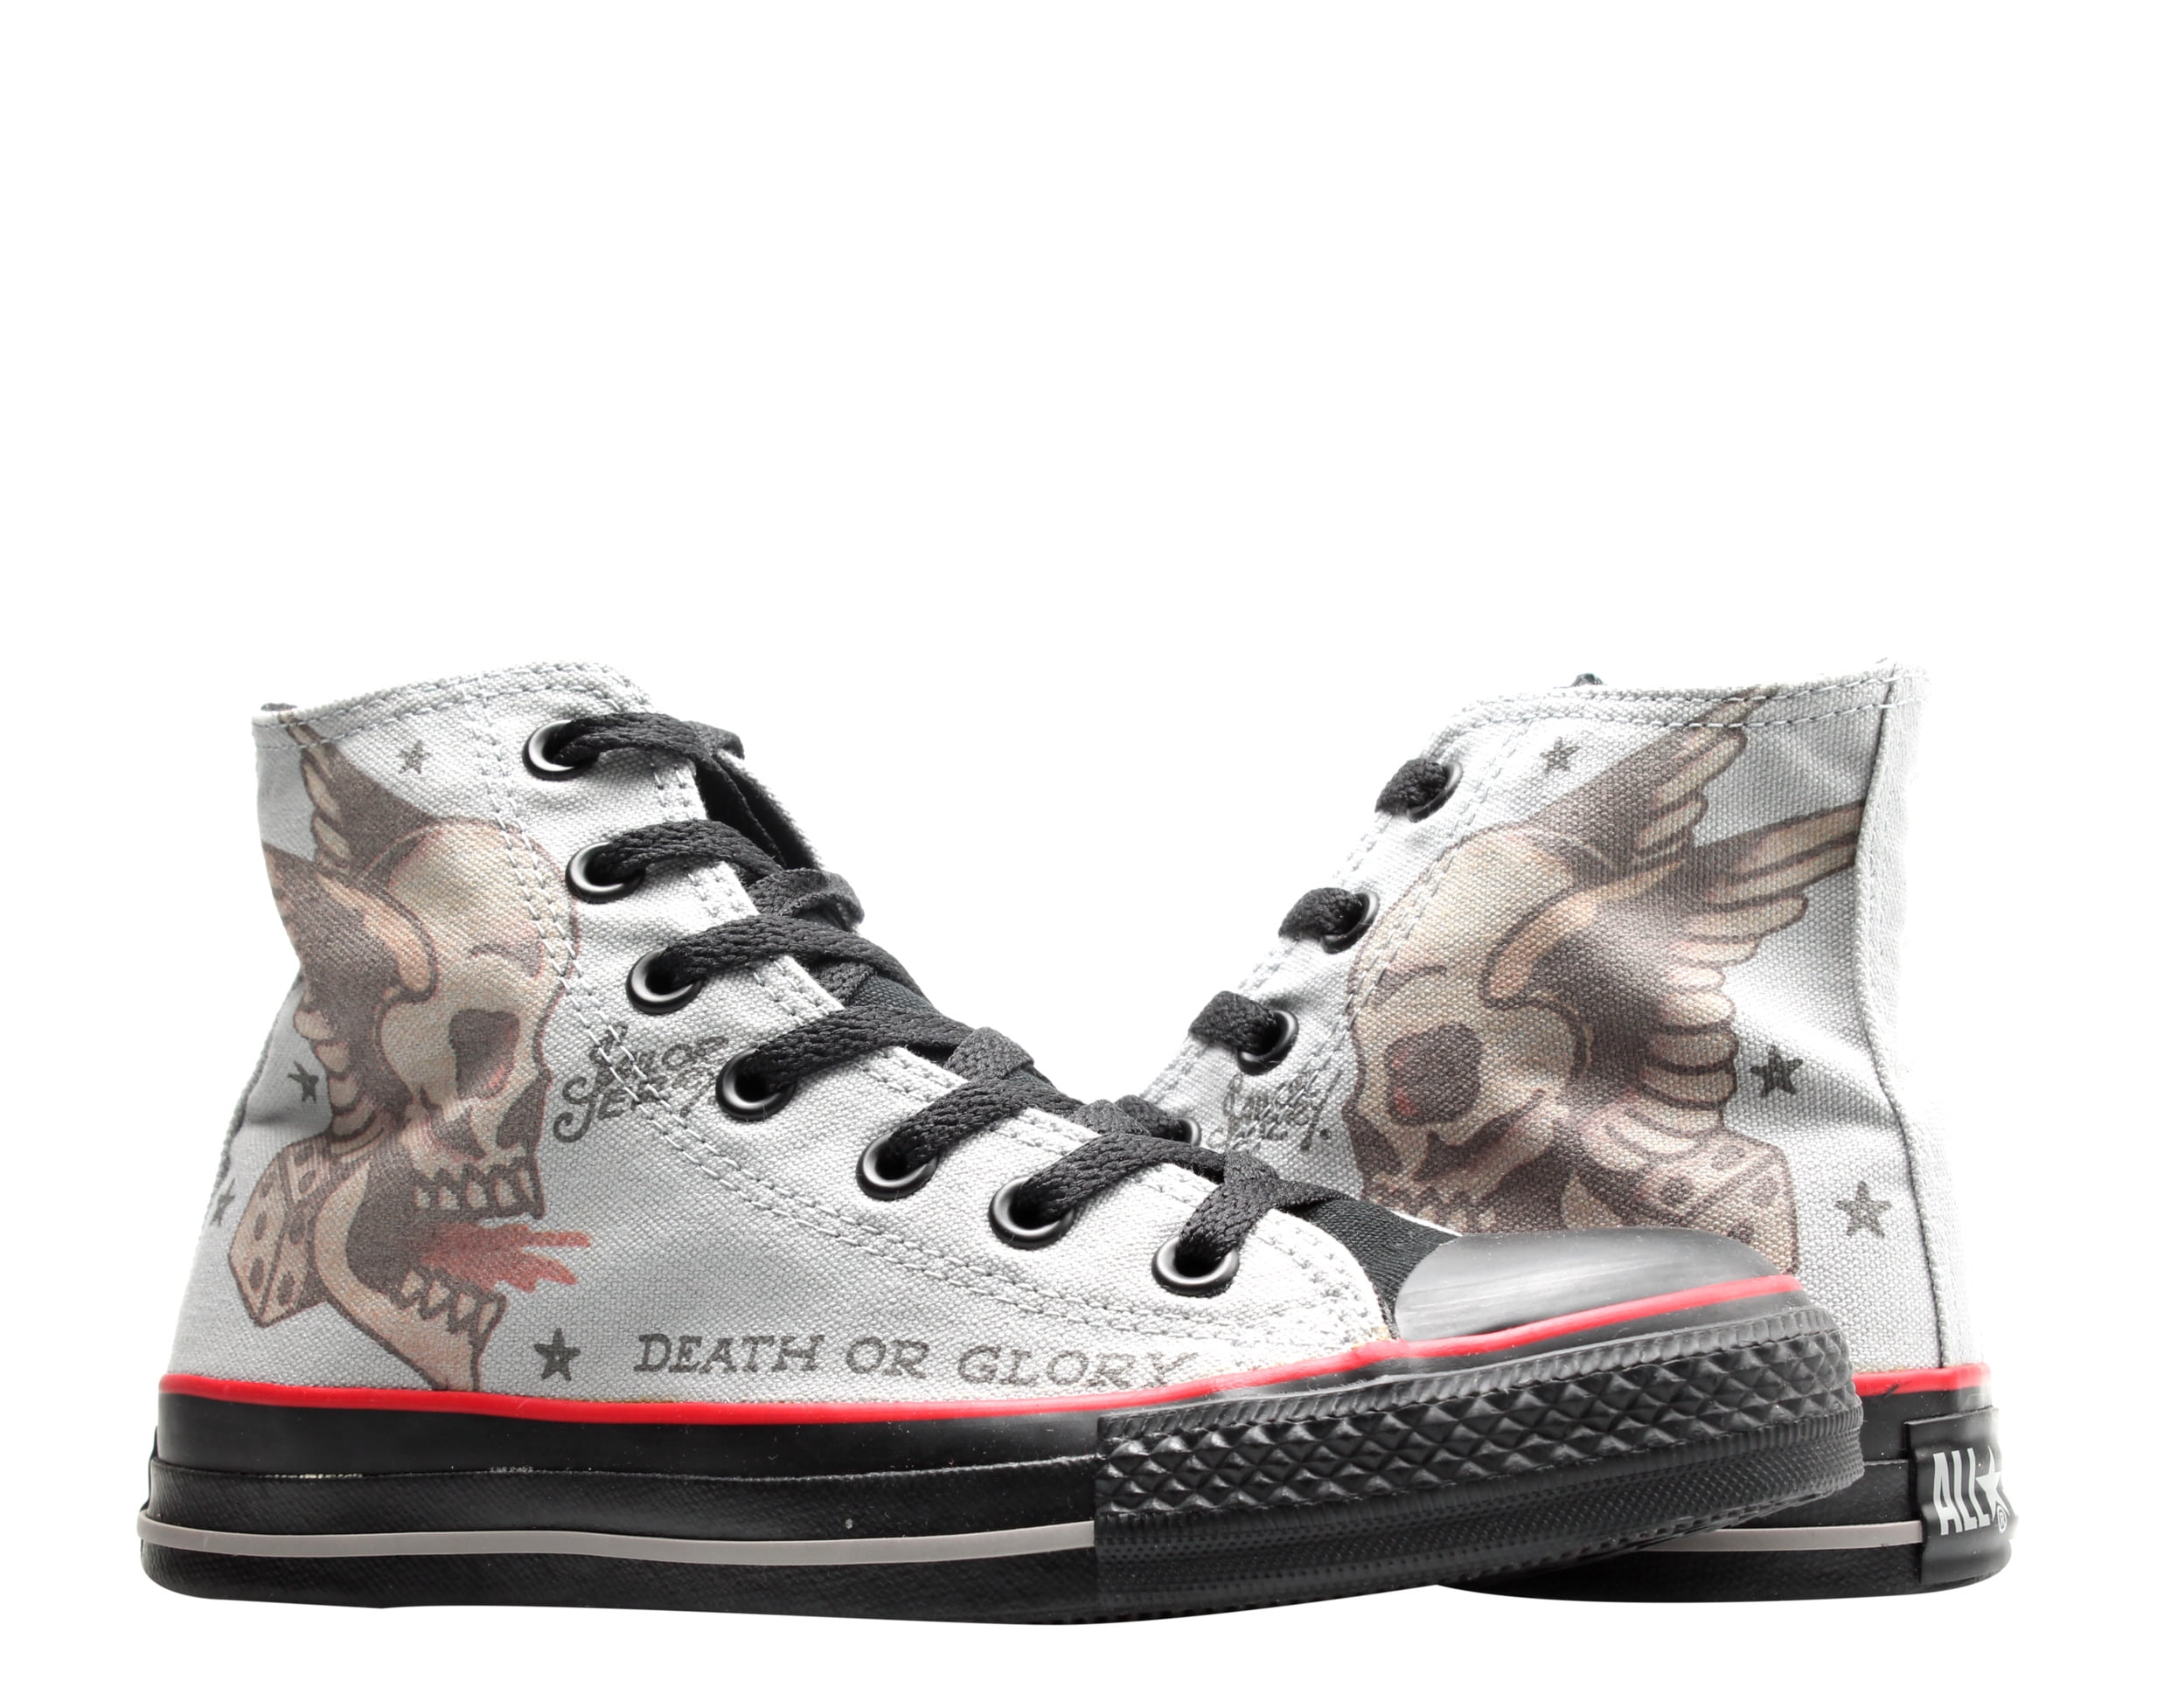 Converse Taylor All Star Sailor Jerry Tattoo Sneakers Size 5.5 - Walmart.com